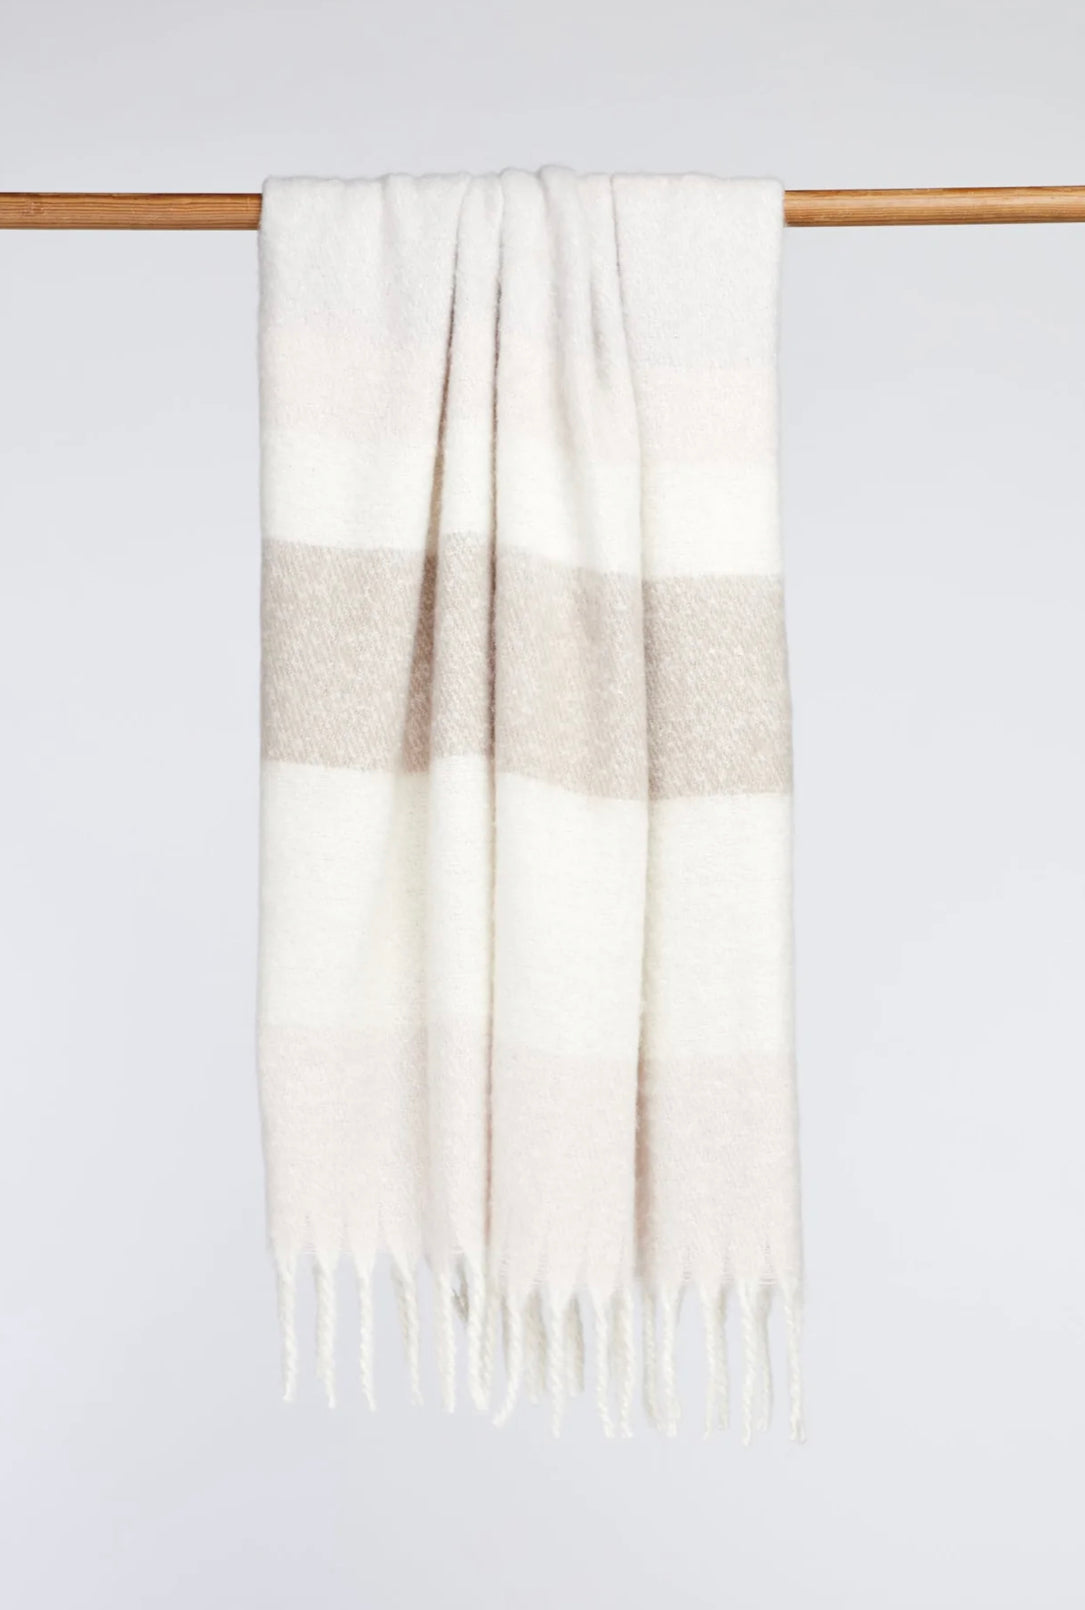 The Hornby Blanket - Fawn Stripe - Gentle Fawn